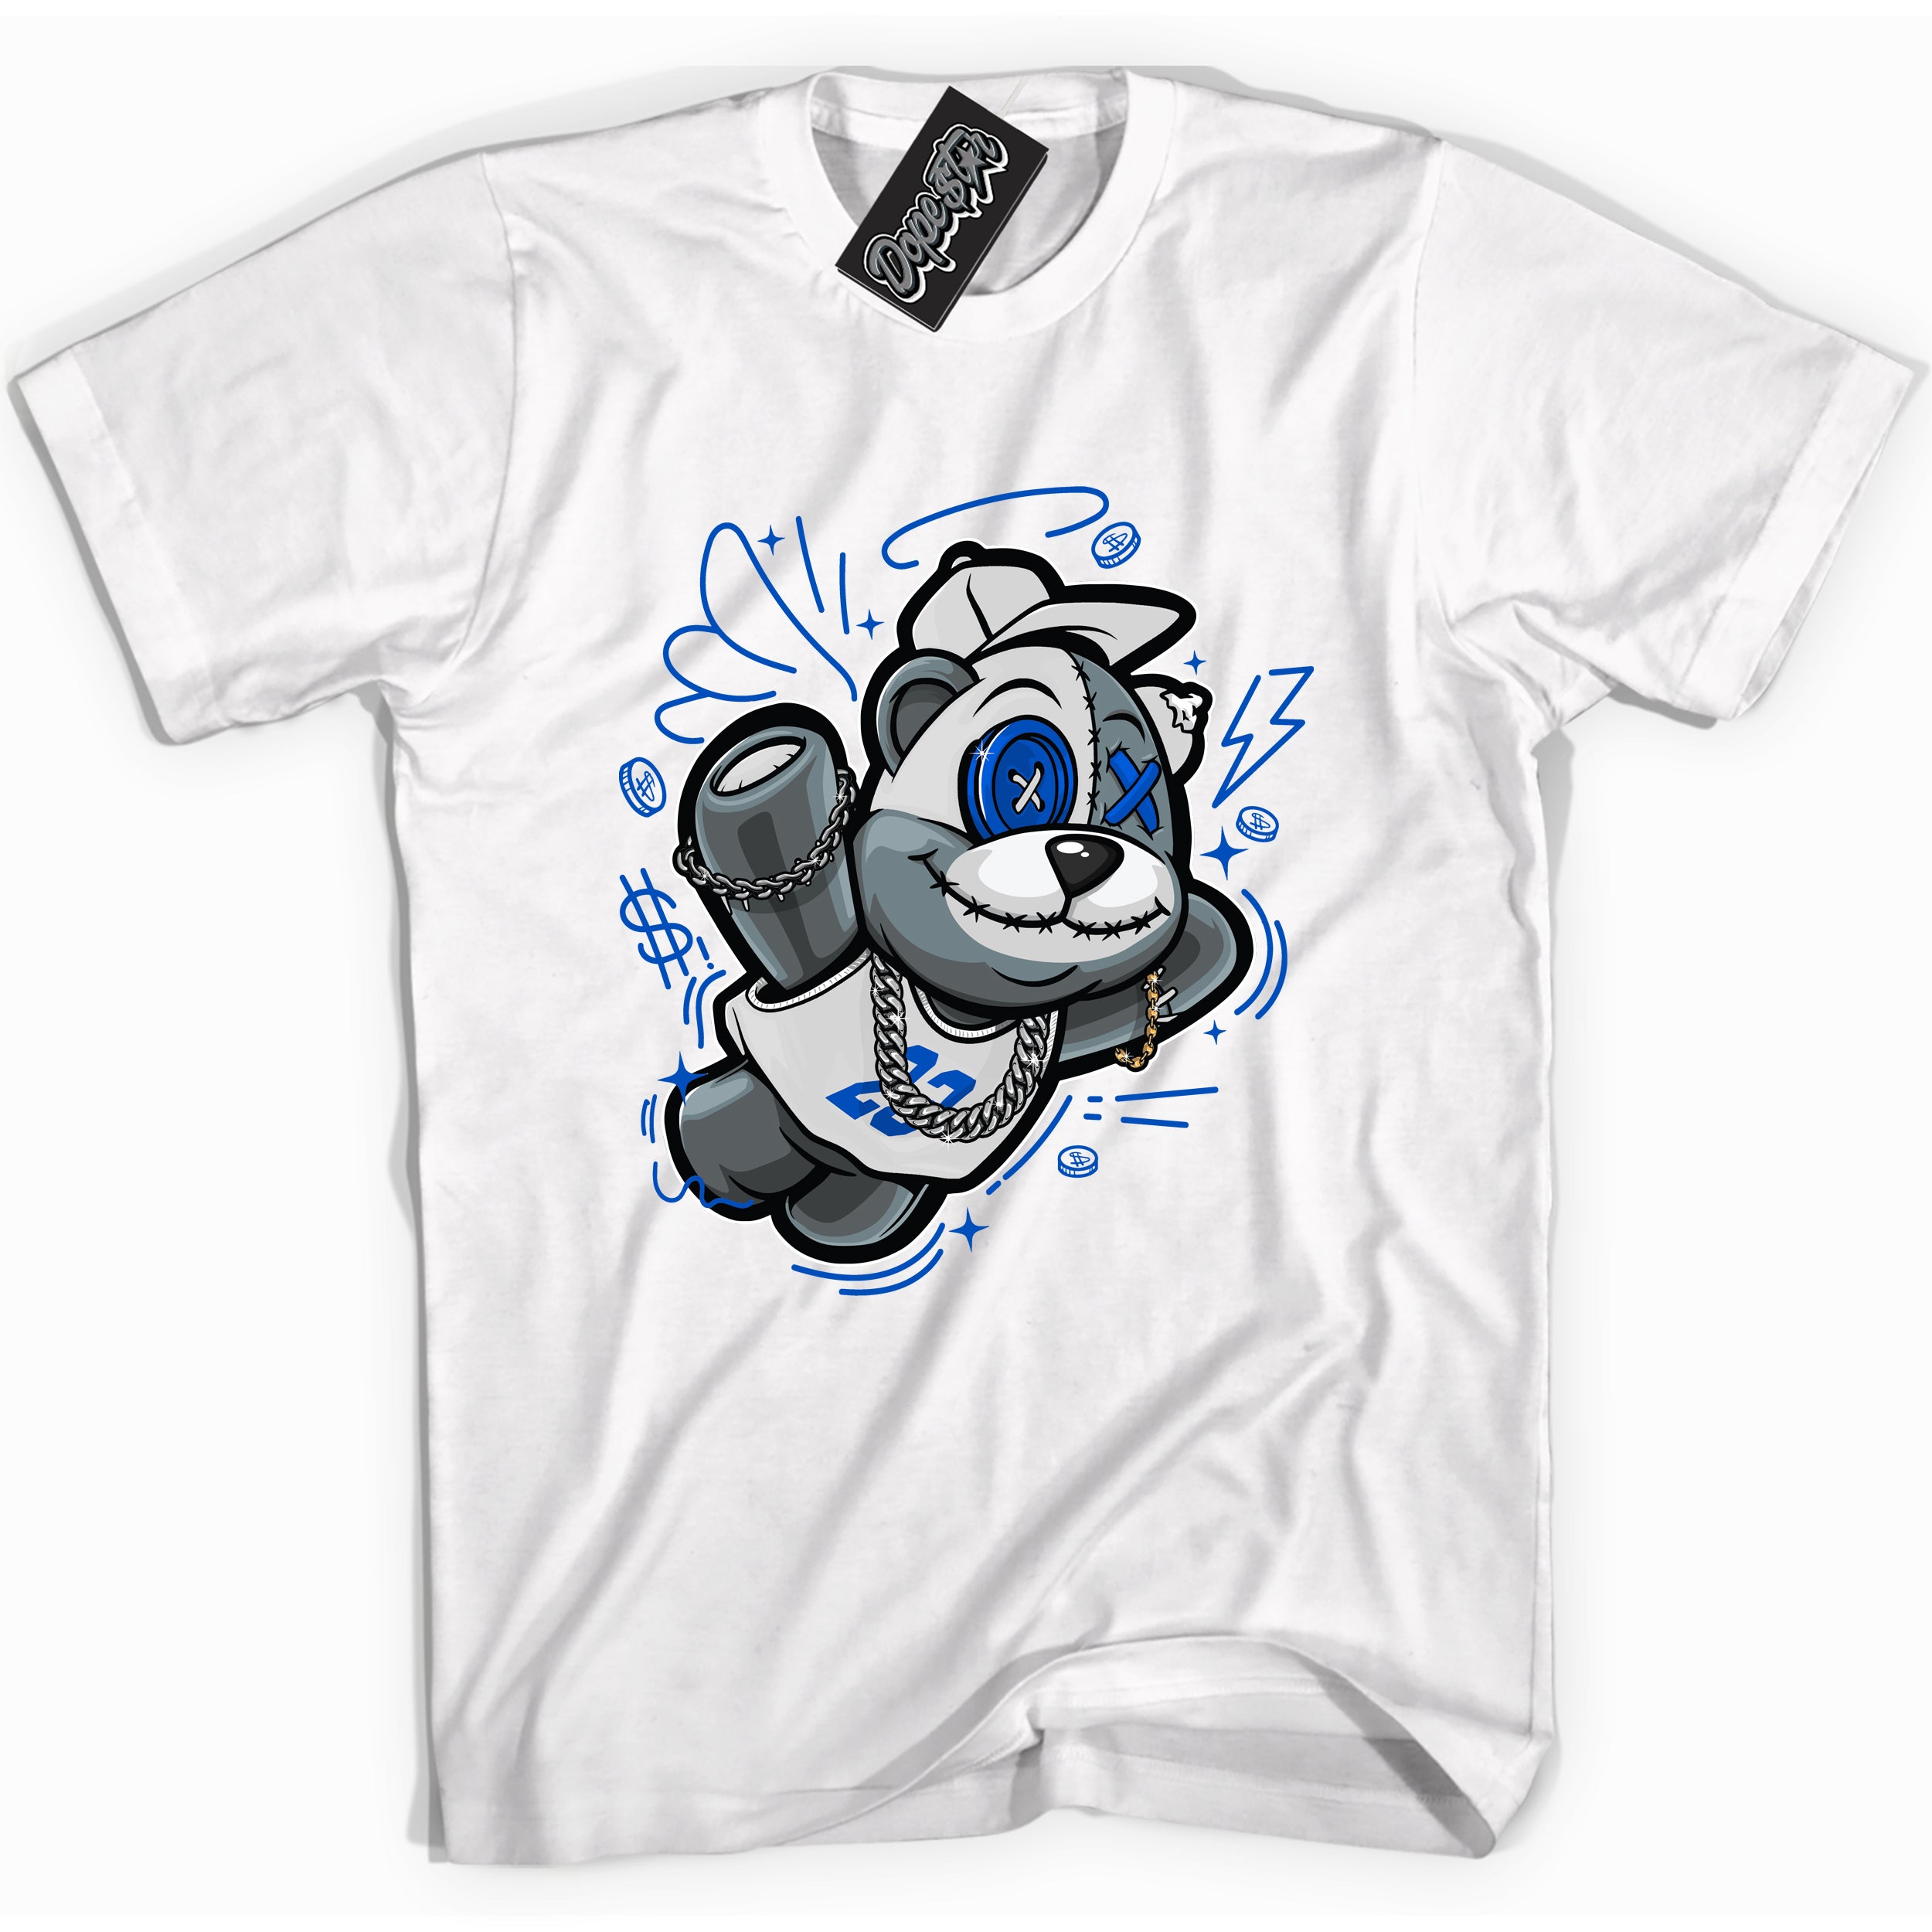 Cool White graphic tee with Slam Dunk Bear print, that perfectly matches OG Royal Reimagined 1s sneakers 